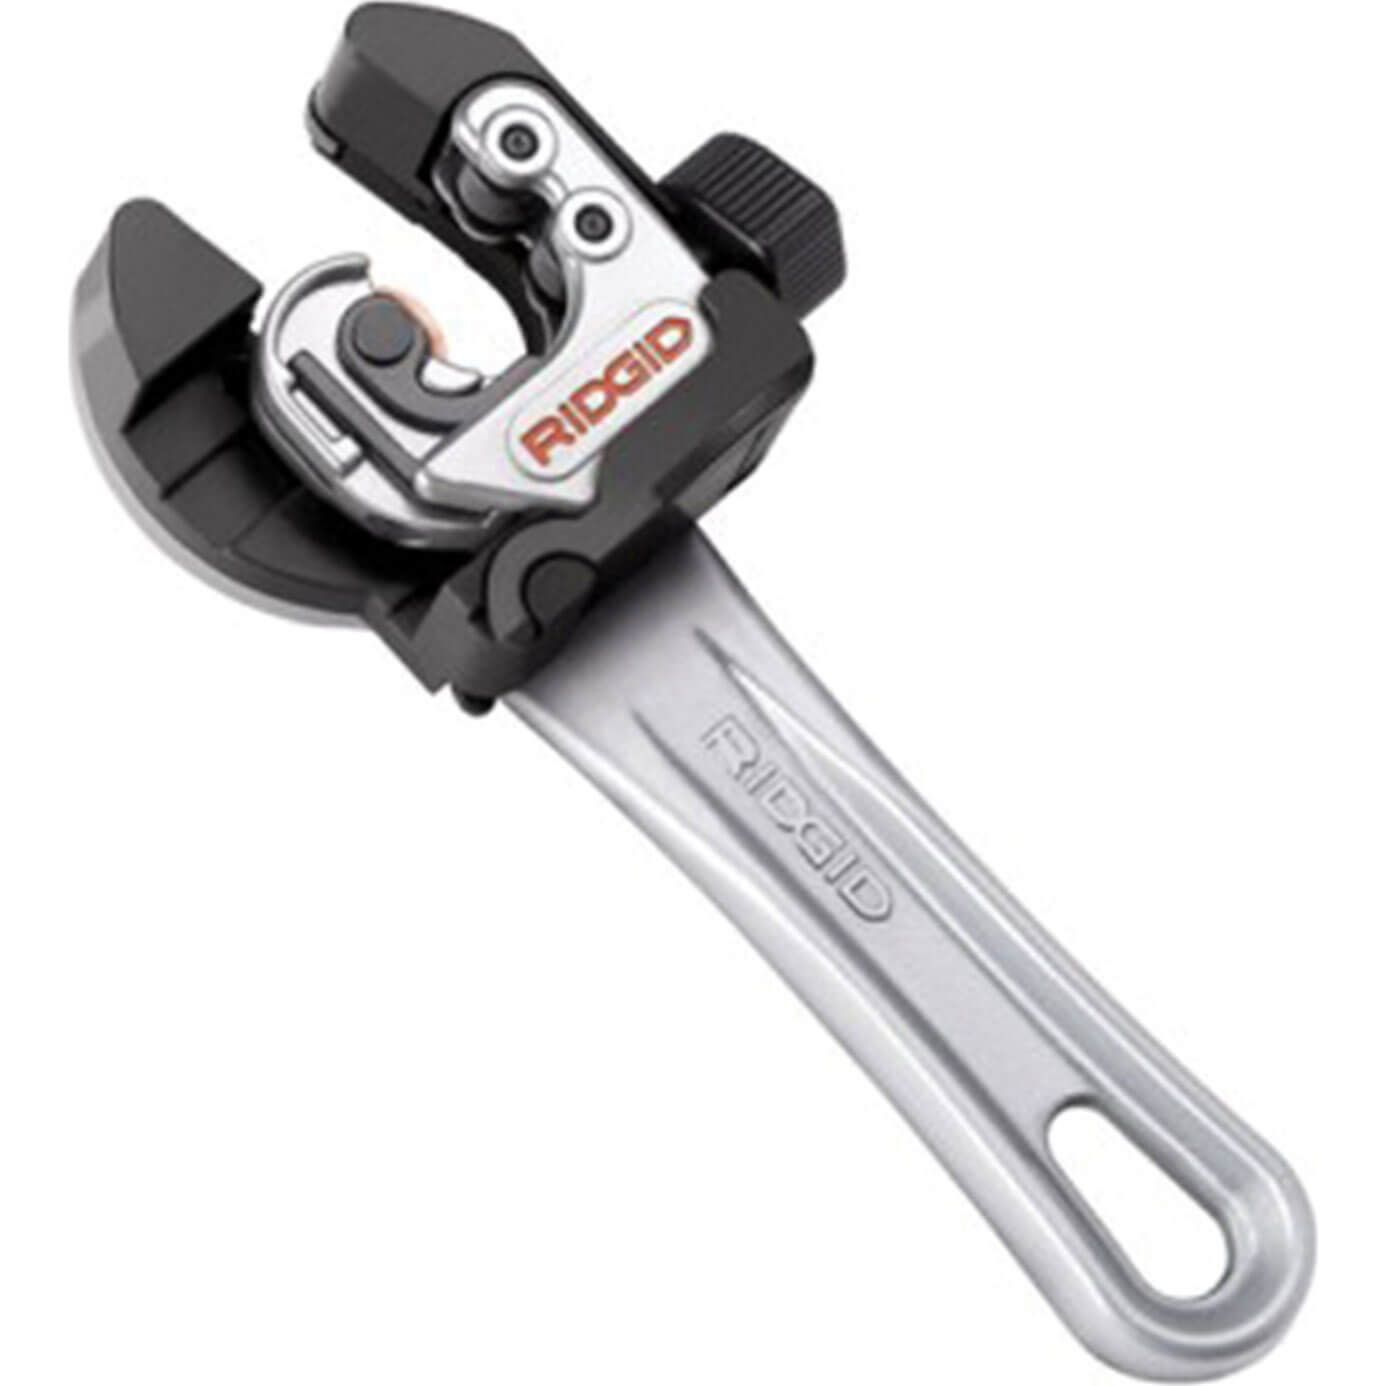 Image of Ridgid Autofeed Adjustable Pipe Cutter 6mm - 28mm